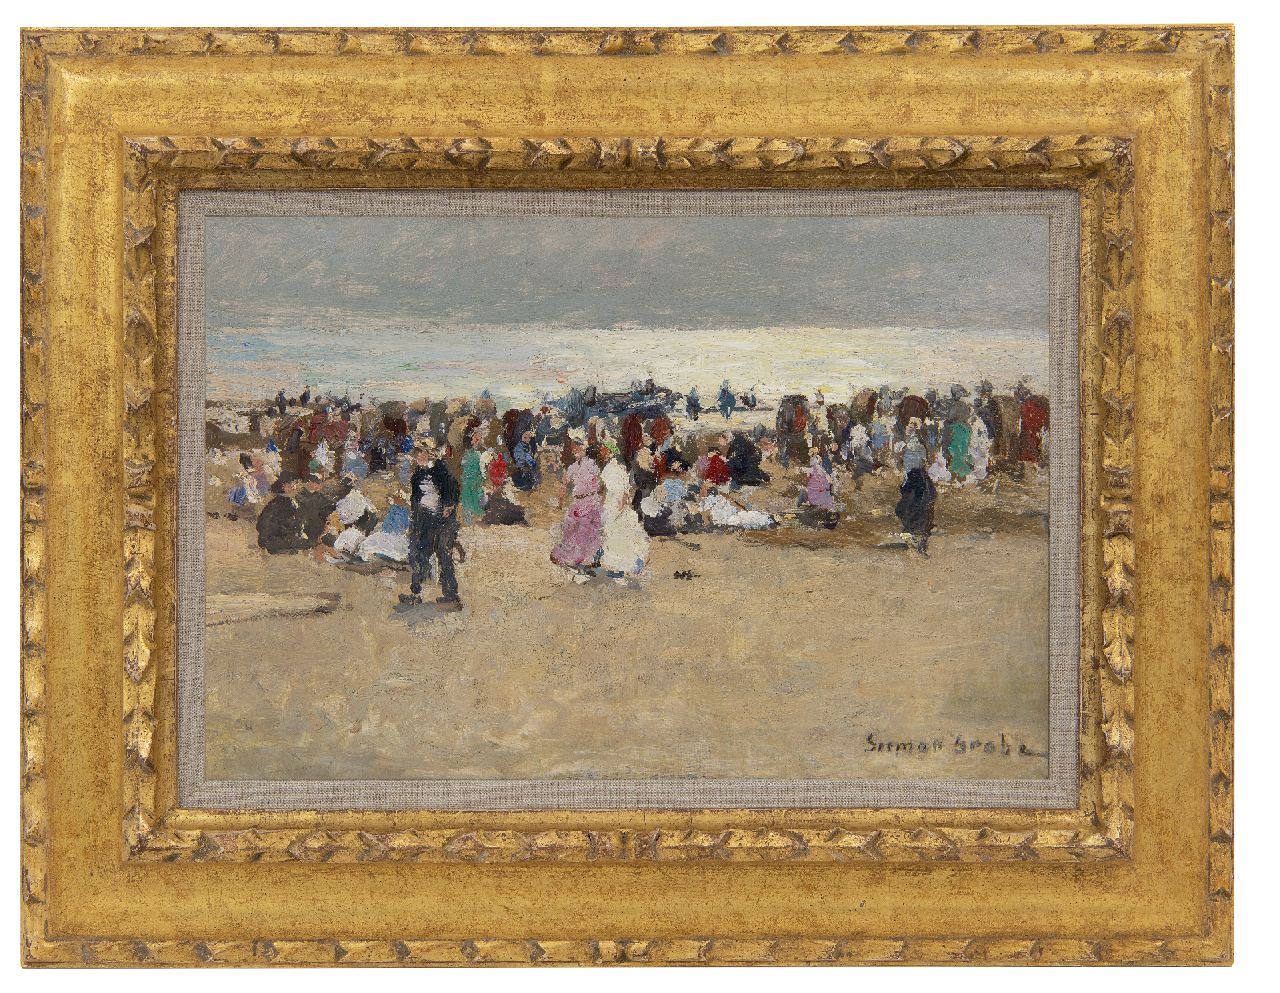 Grobe P.G.  | Philipp 'German' Grobe, Colourful gathering on the beach of Katwijk, oil on panel 23.9 x 36.0 cm, signed l.r.